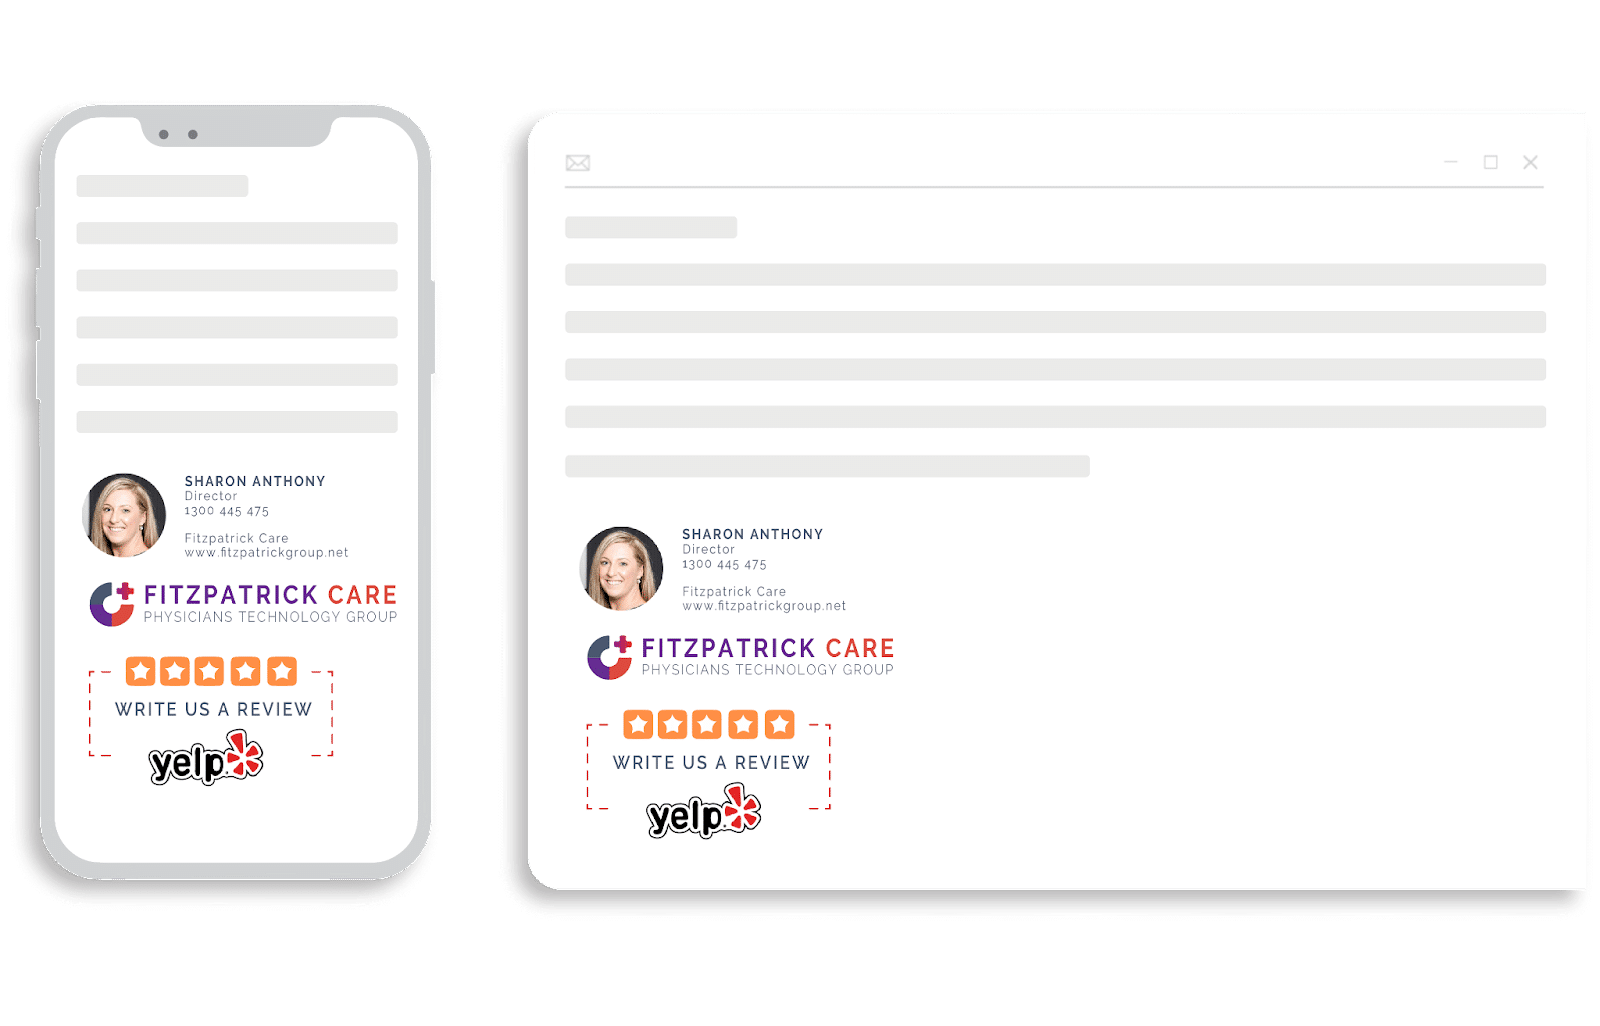 Email signature on desktop and mobile